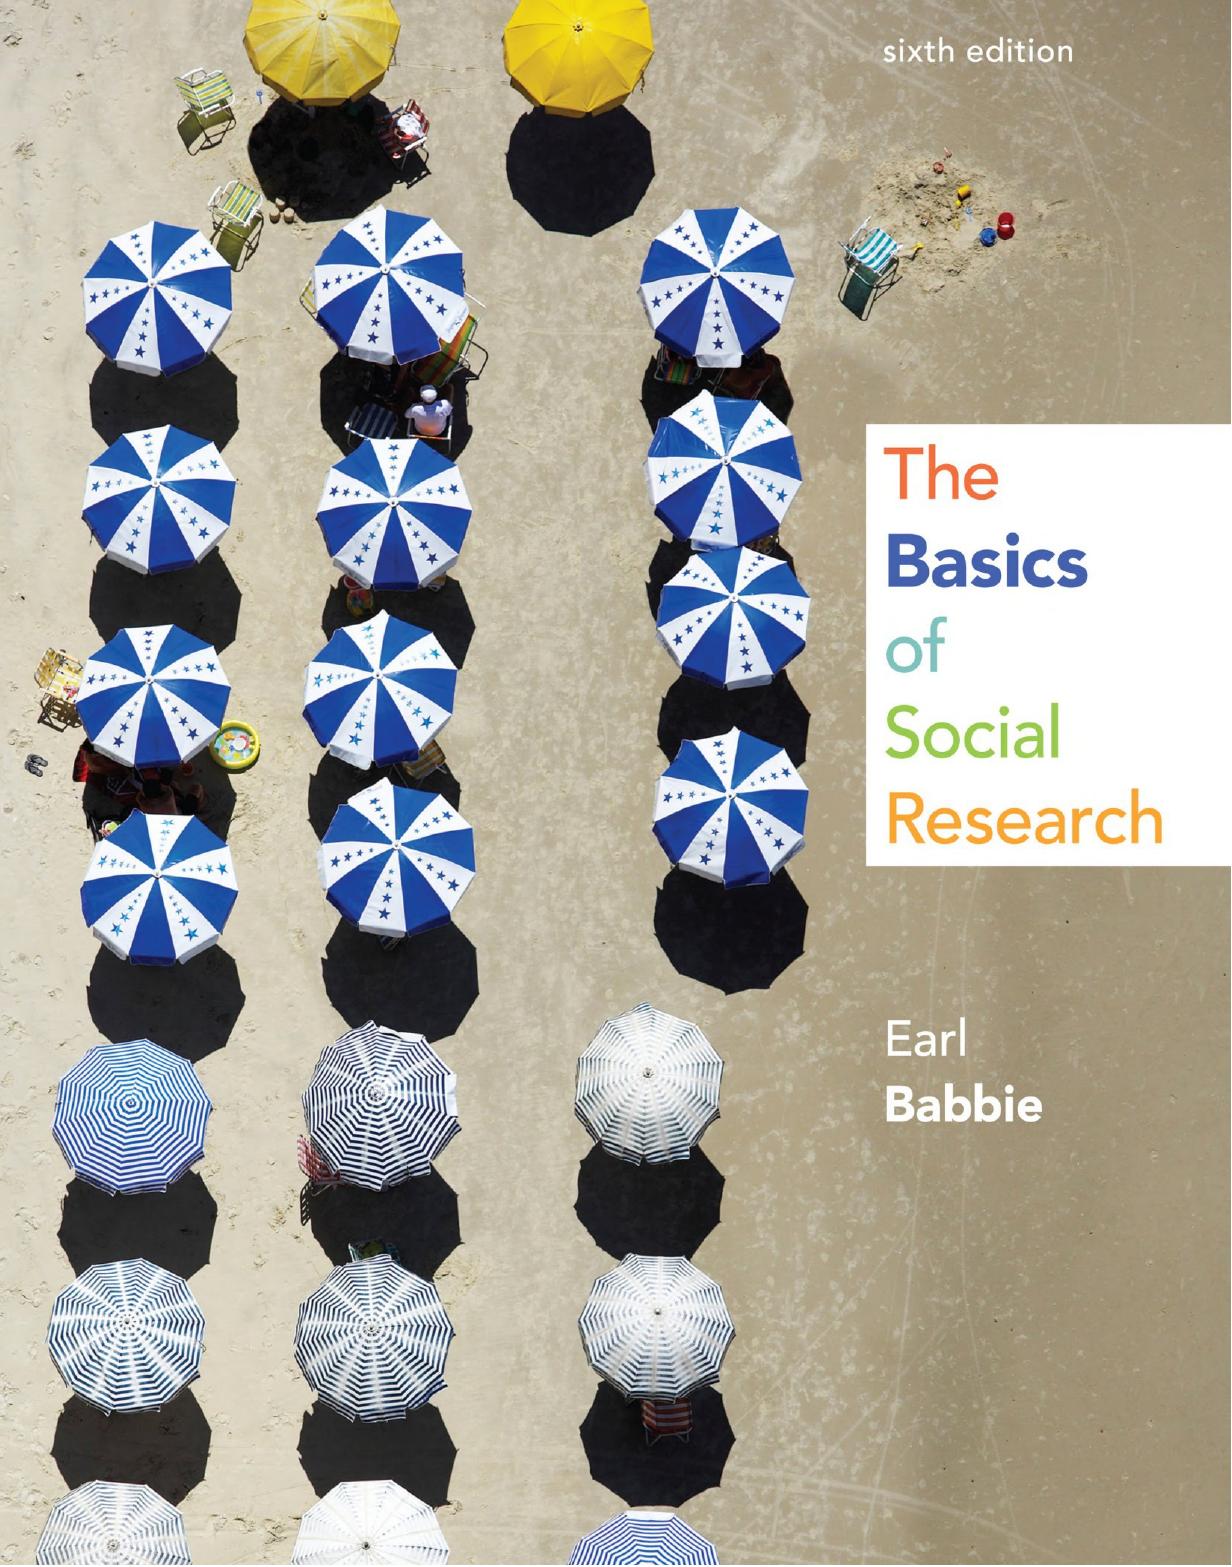 The Basics of Social Research by Earl R. Babbie